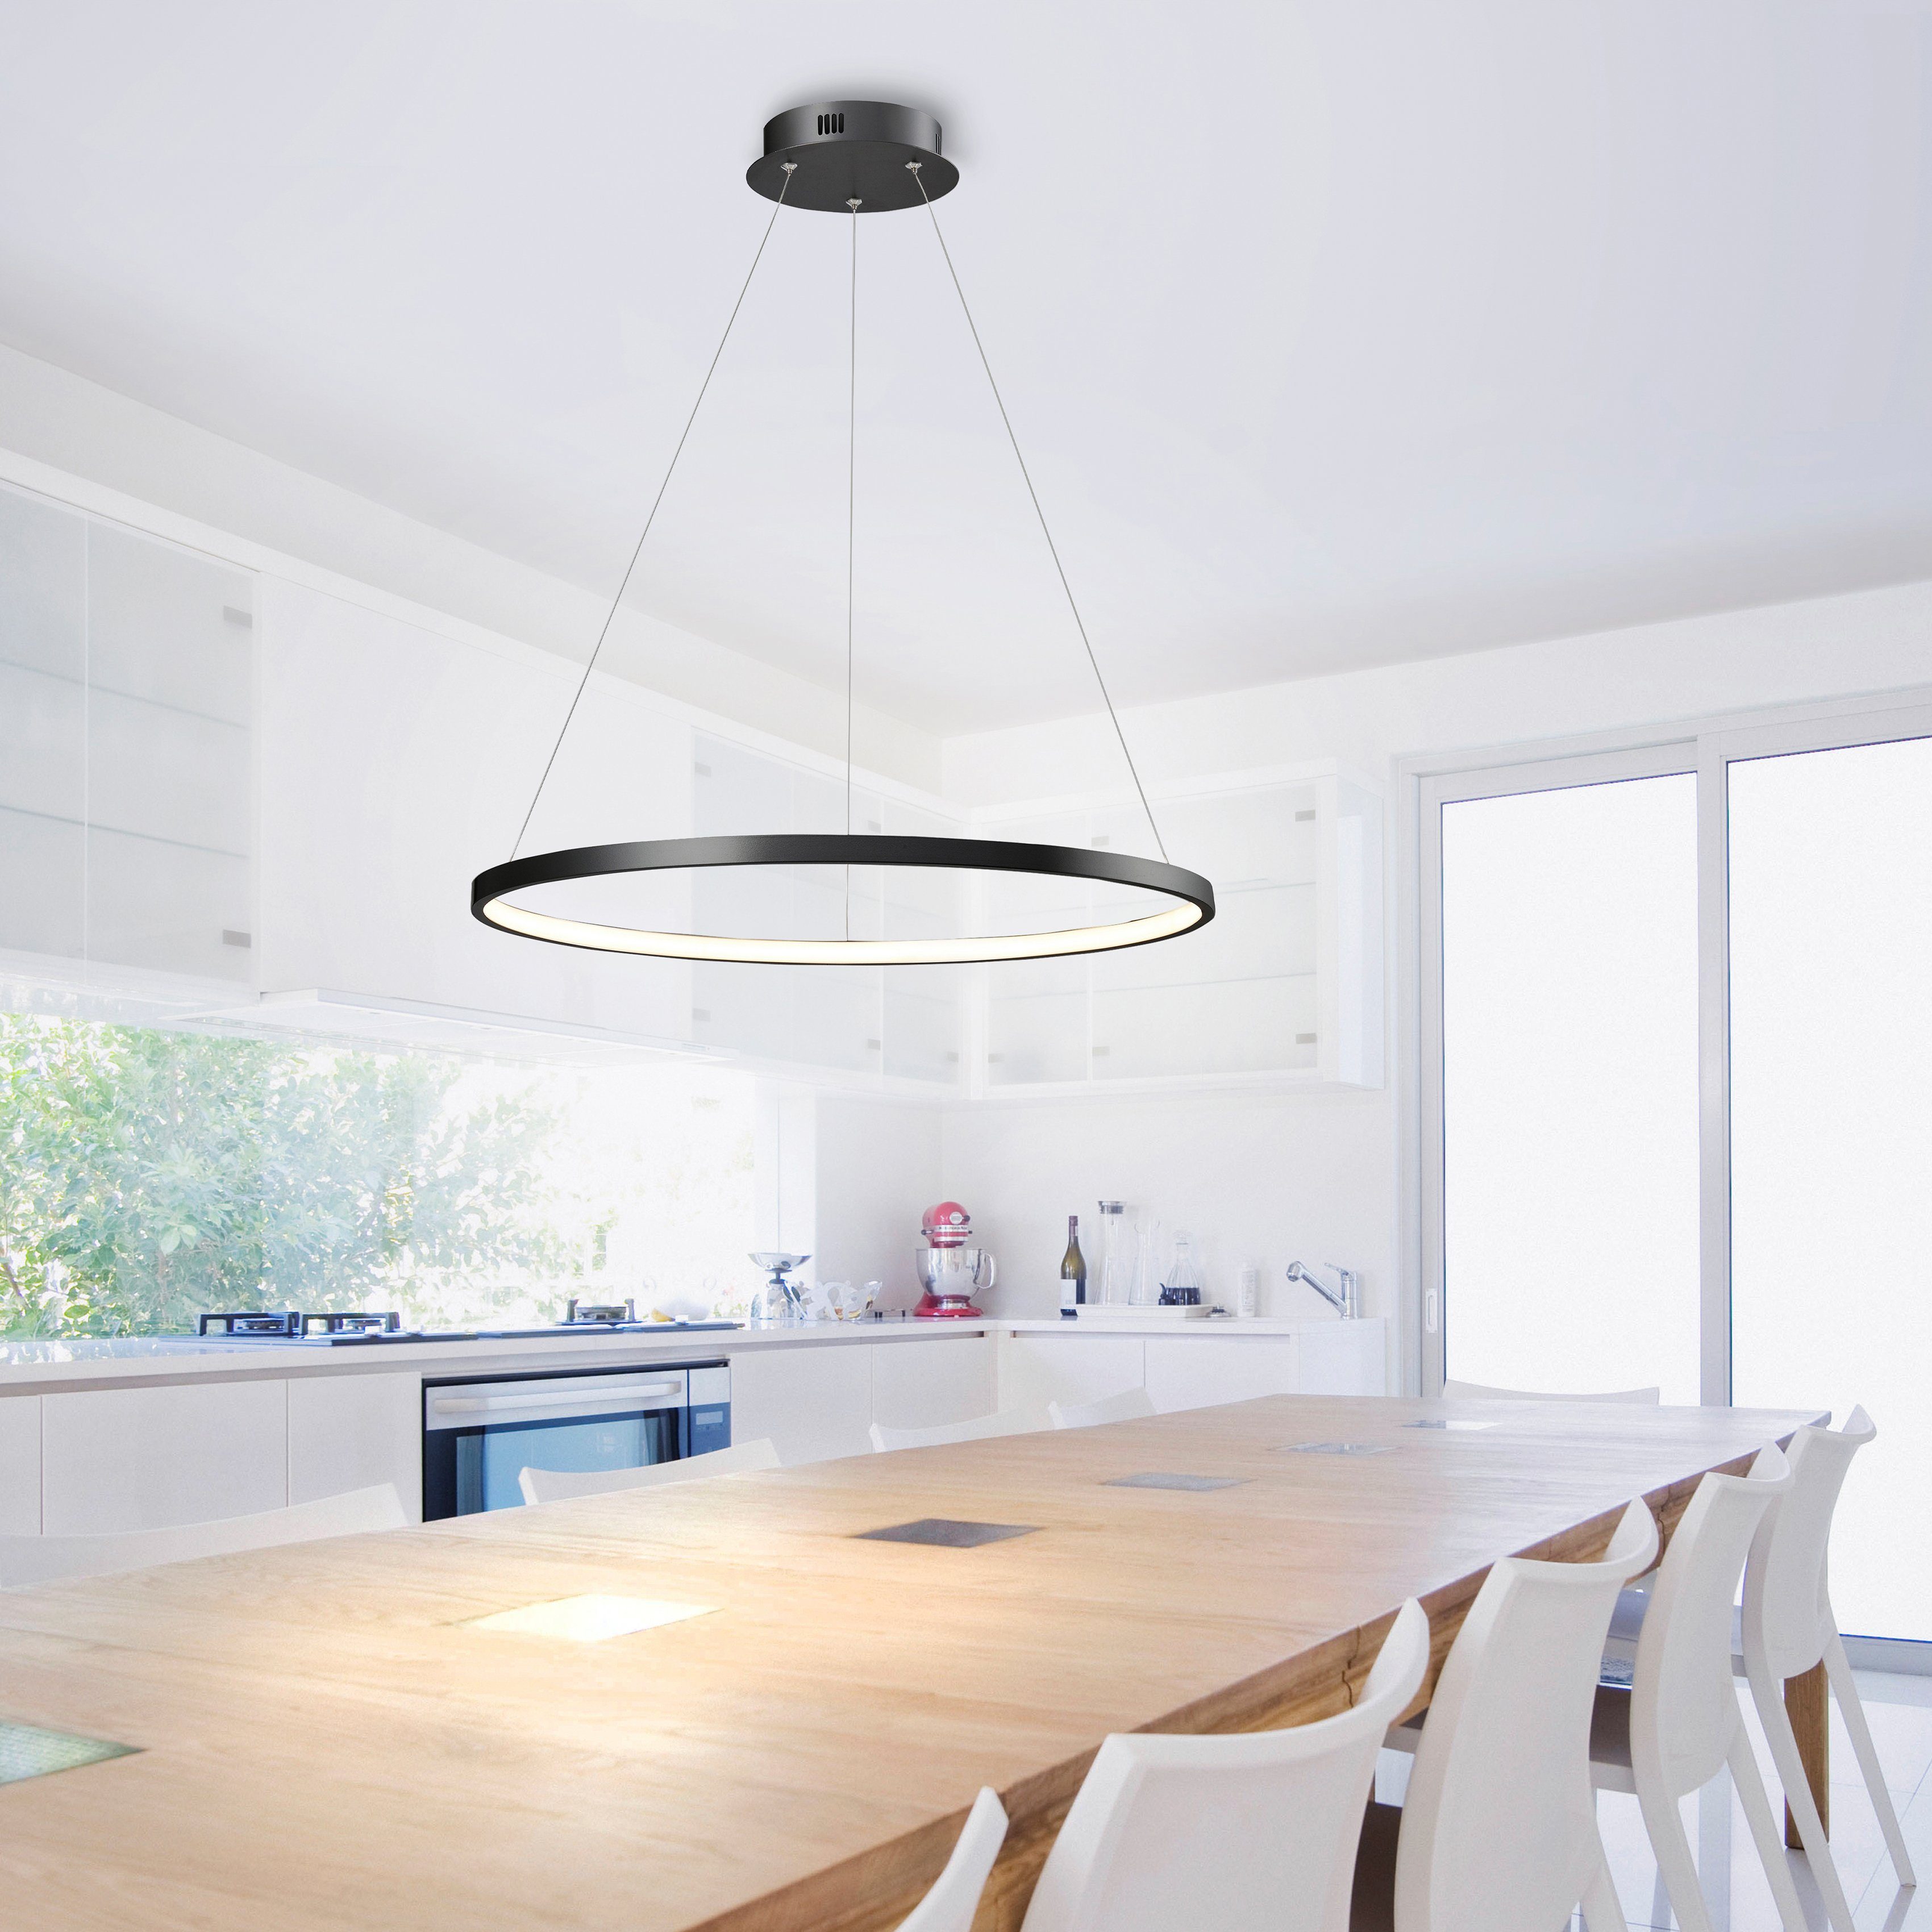 Ring of Pendelleuchte LED Hängelampe Style integriert, Places LED fest modern LED Raylan, Warmweiß,